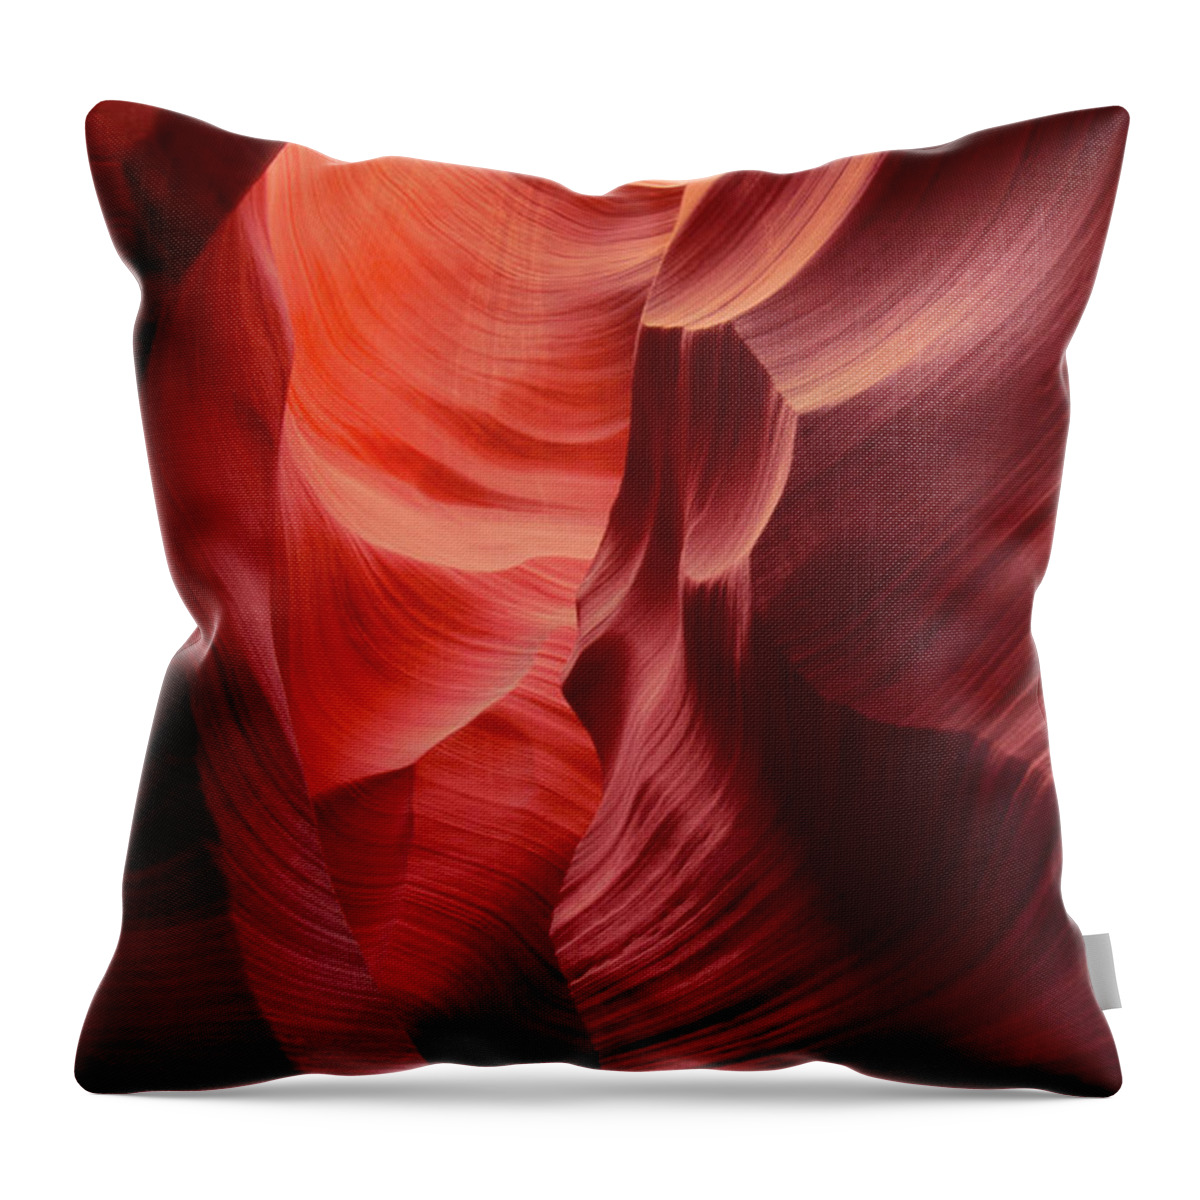 Dave Welling Throw Pillow featuring the photograph Sandstone Walls Lower Antelope Slot Canyon Arizona by Dave Welling